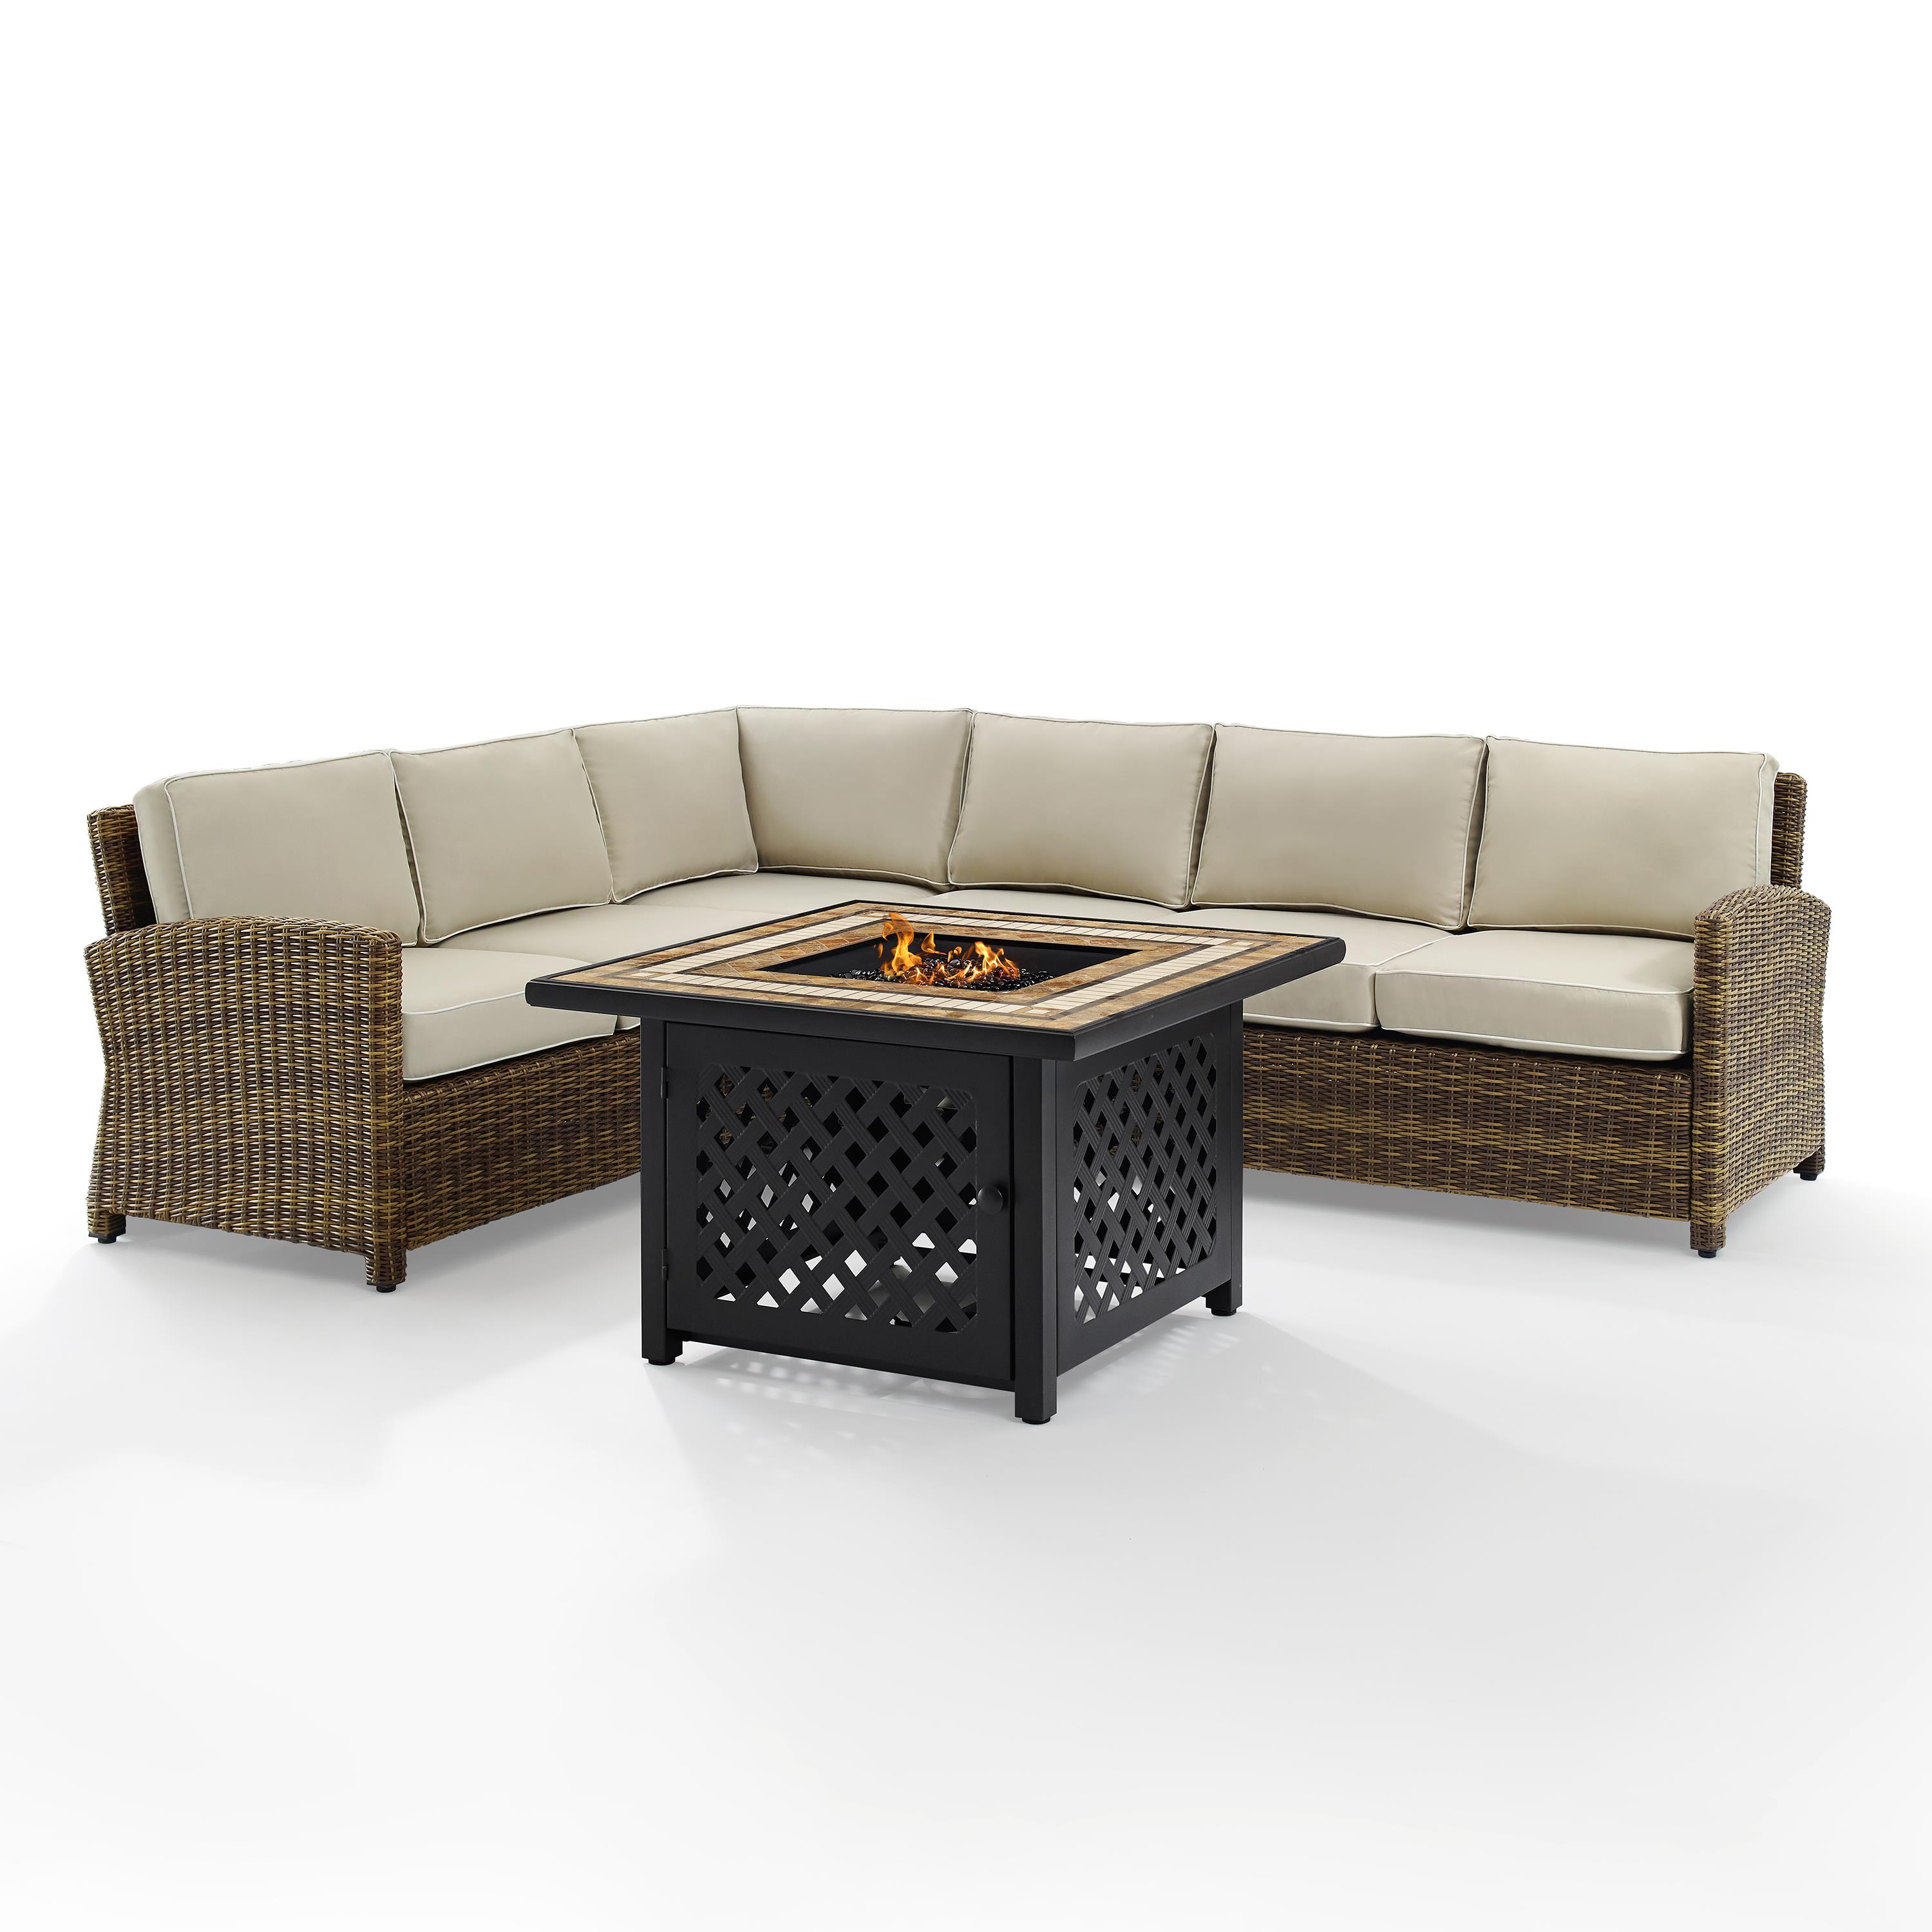 Bradenton 5Pc Outdoor Wicker Sectional Set W/Fire Table Weathered Brown/Sand - Right Corner Loveseat, Left Corner Loveseat, Corner Chair, Center Chair, & Tucson Fire Table - image 4 of 9